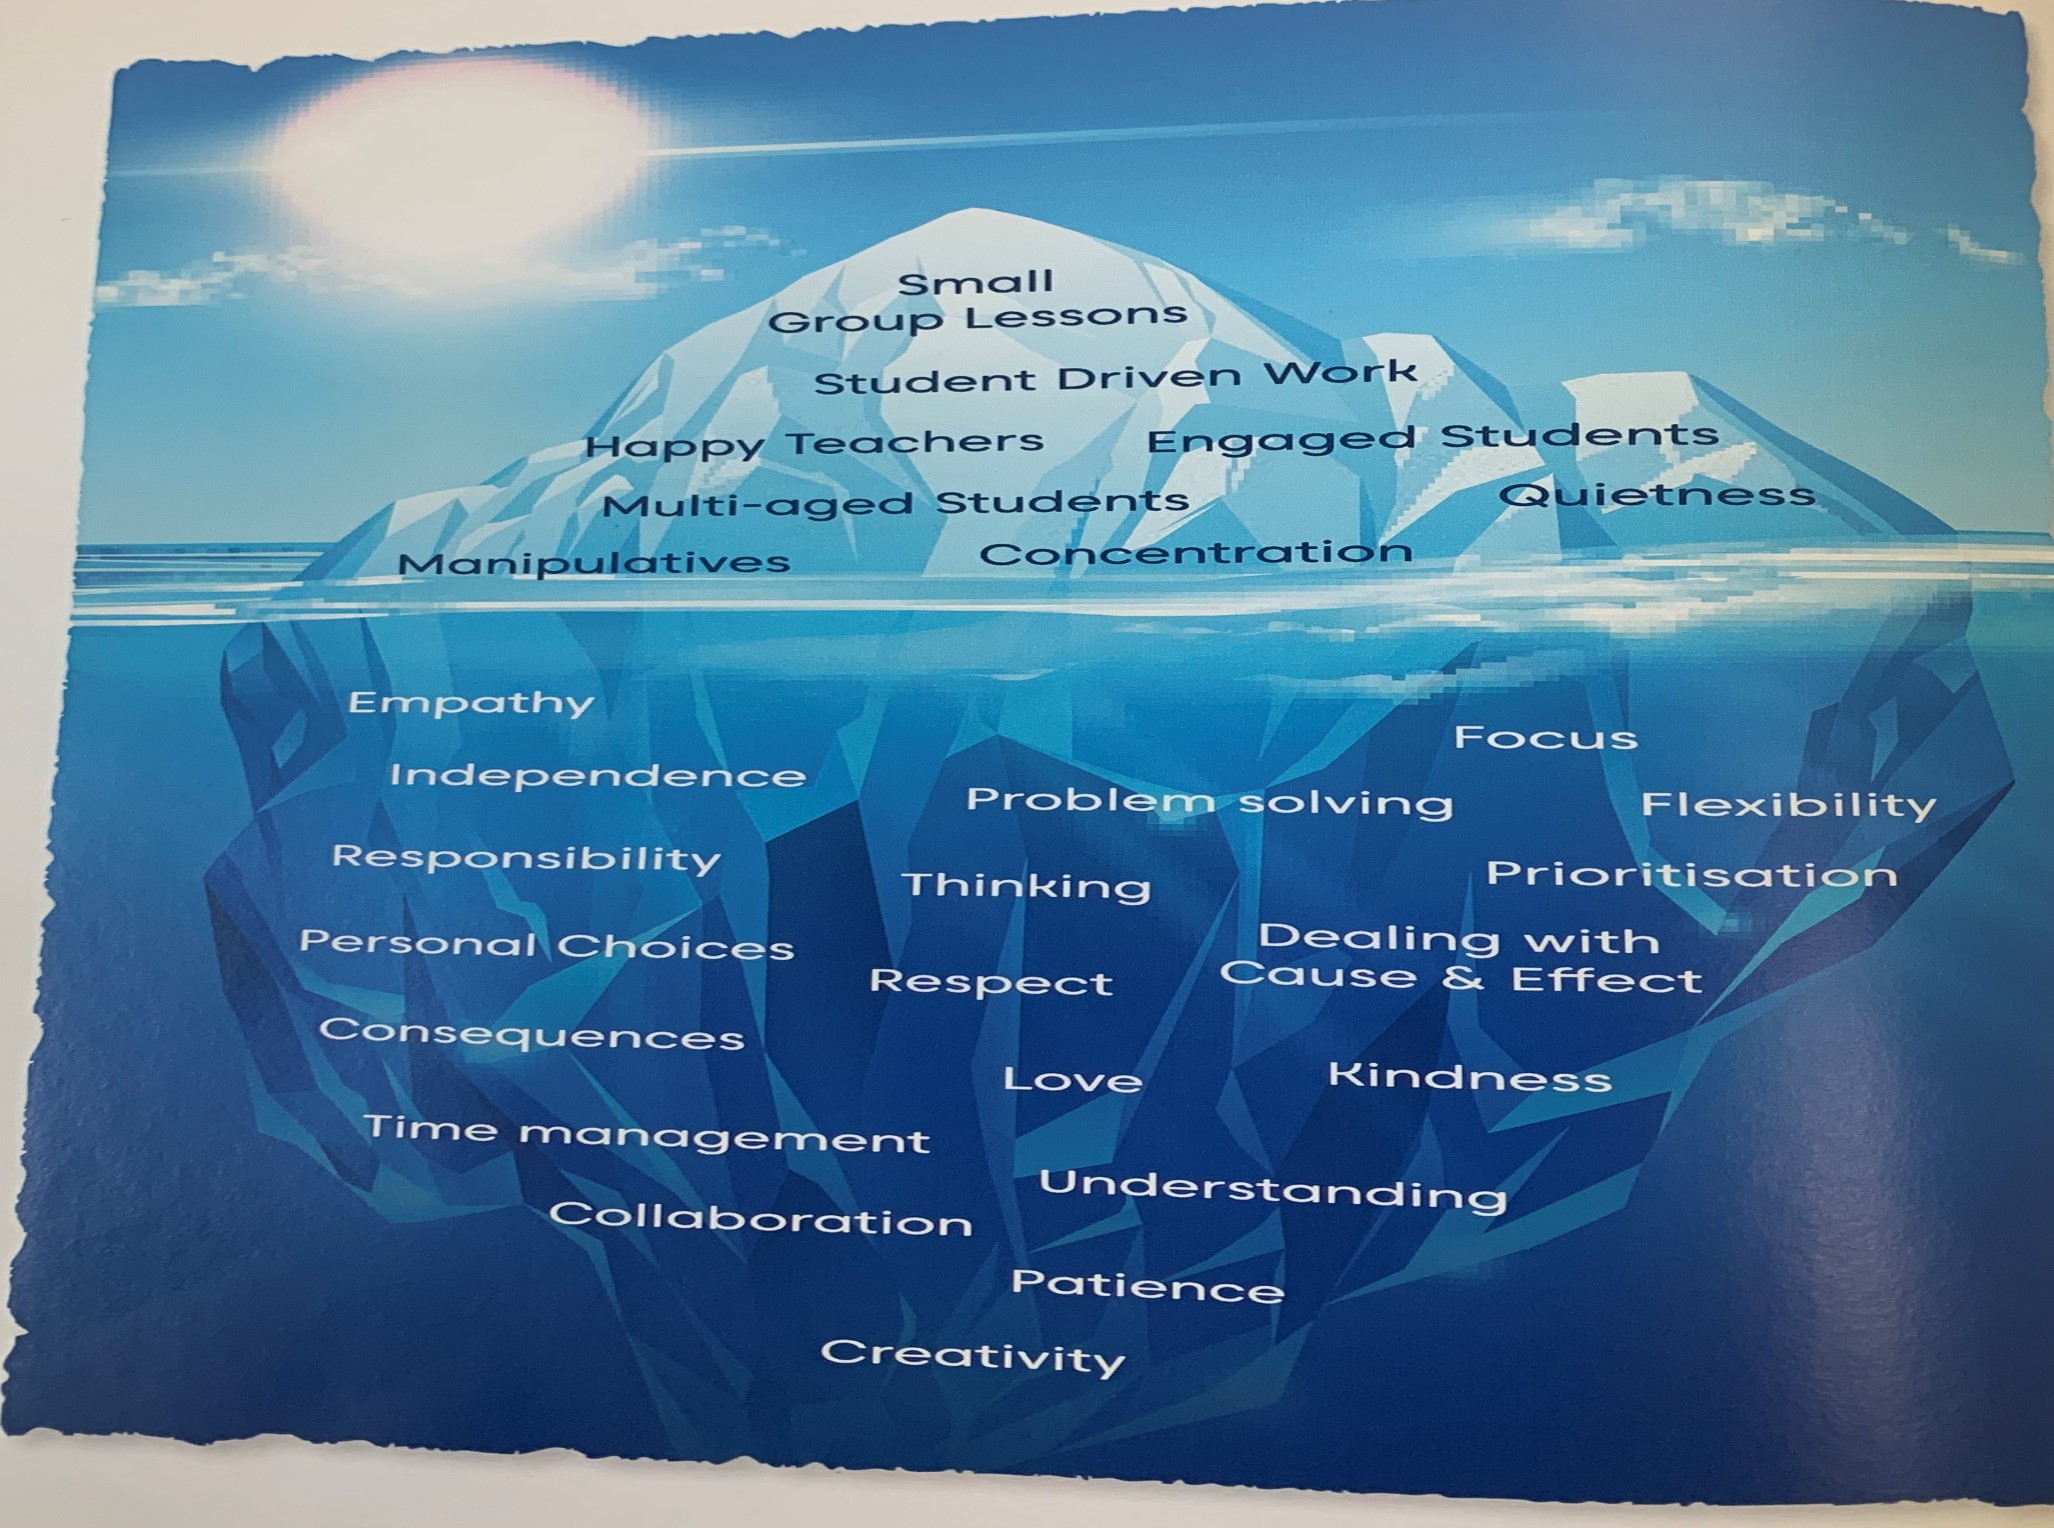 Innovation represented by an image of an Iceberg